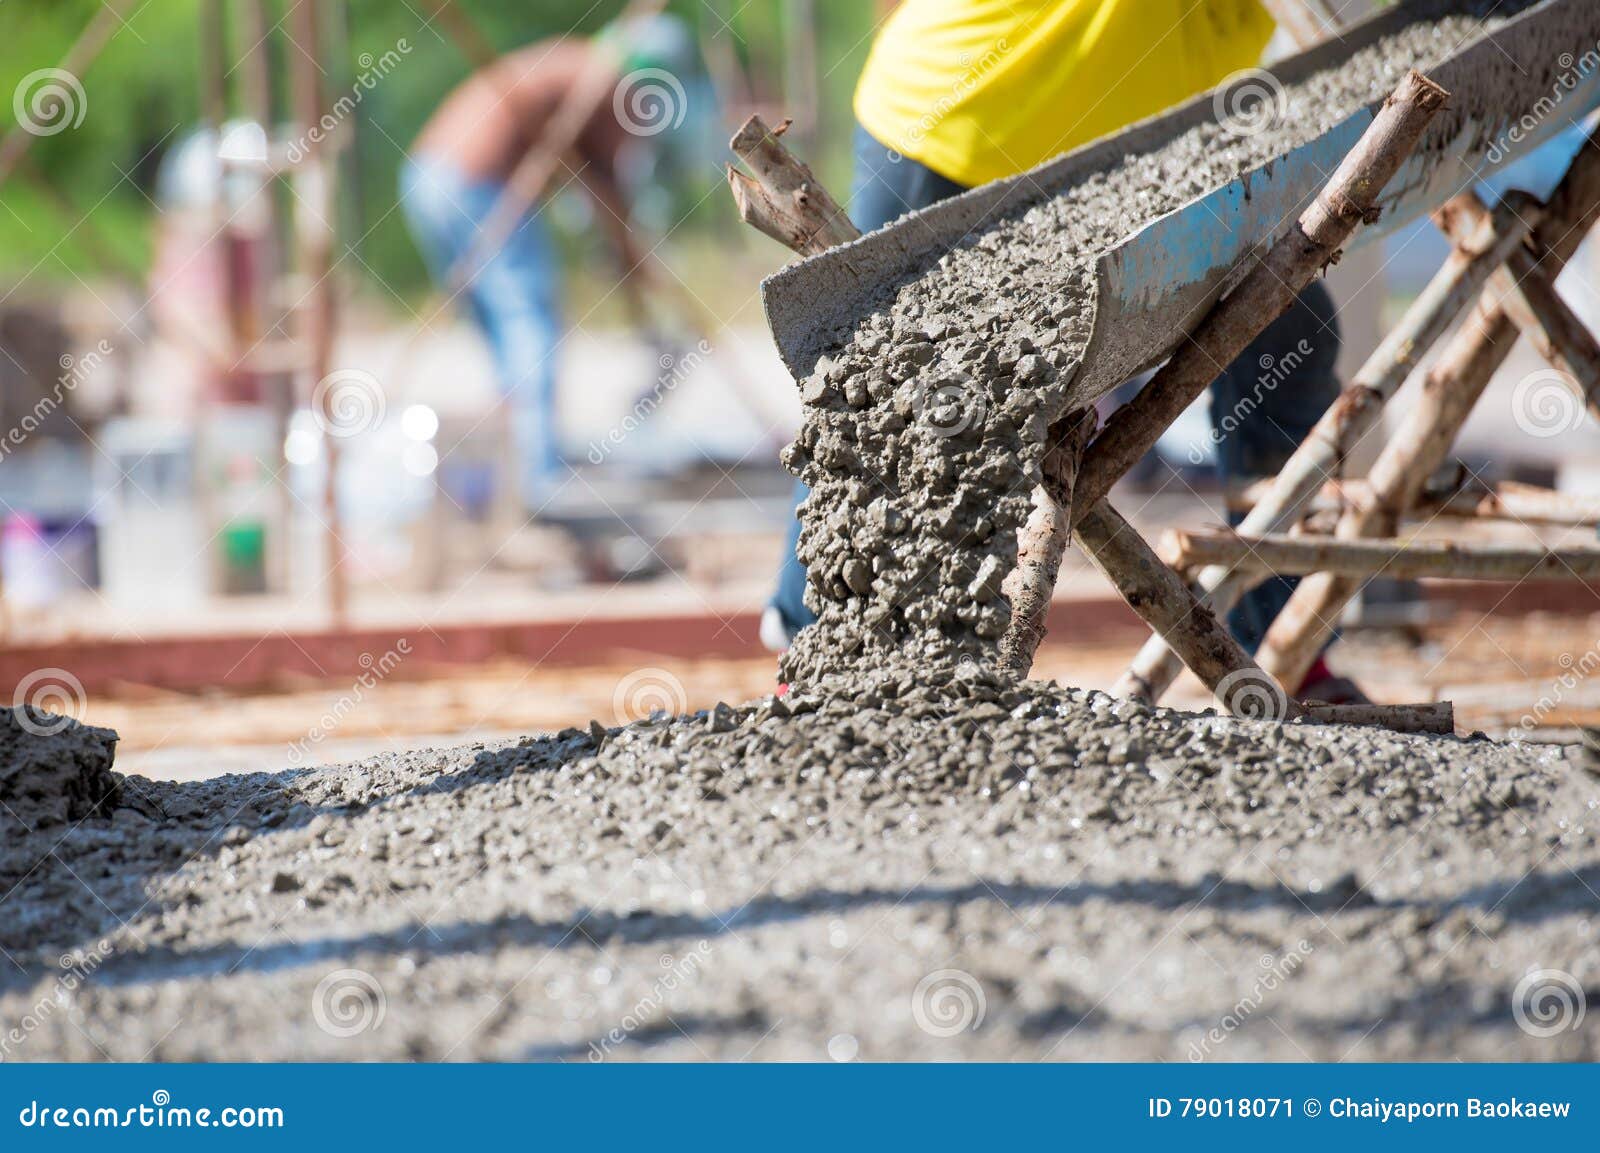 concrete pouring during commercial concreting floors of building